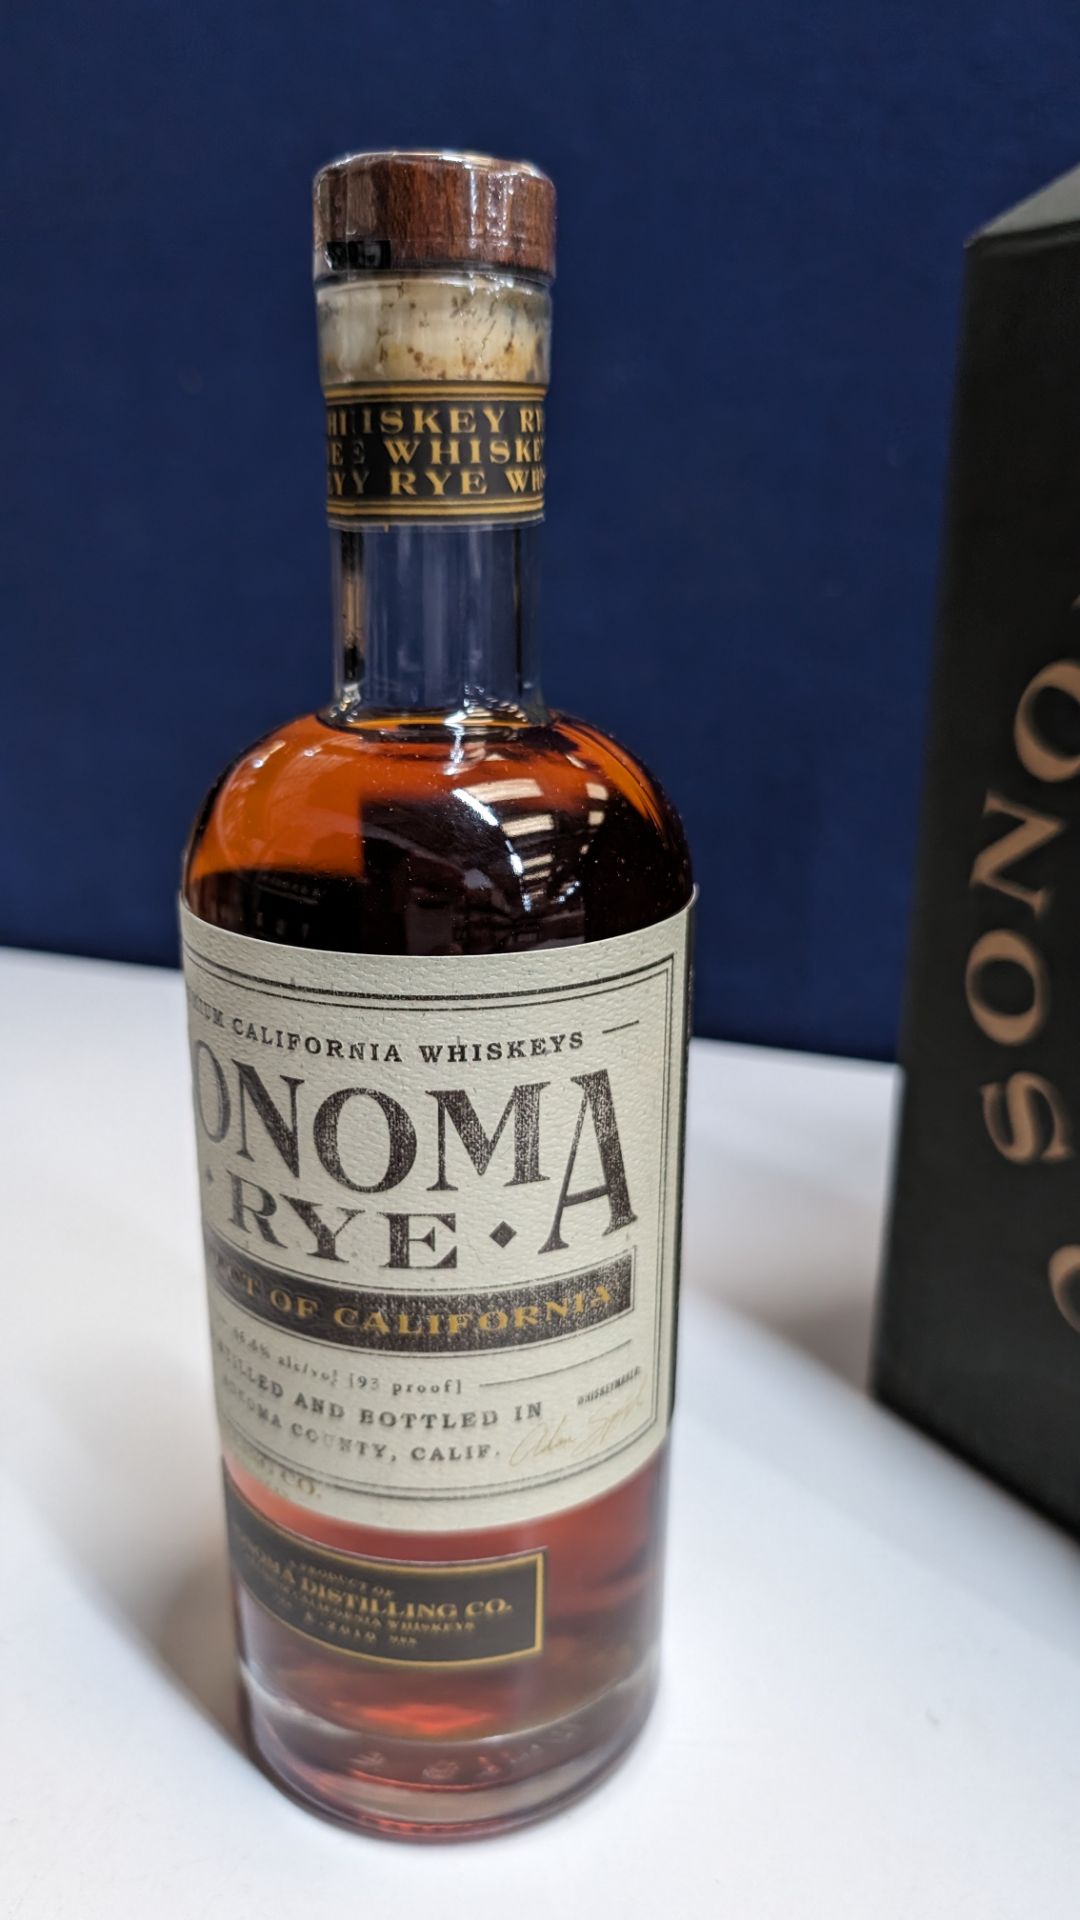 6 off 700ml bottles of Sonoma Rye Whiskey. In Sonoma branded box which includes bottling details on - Image 4 of 7